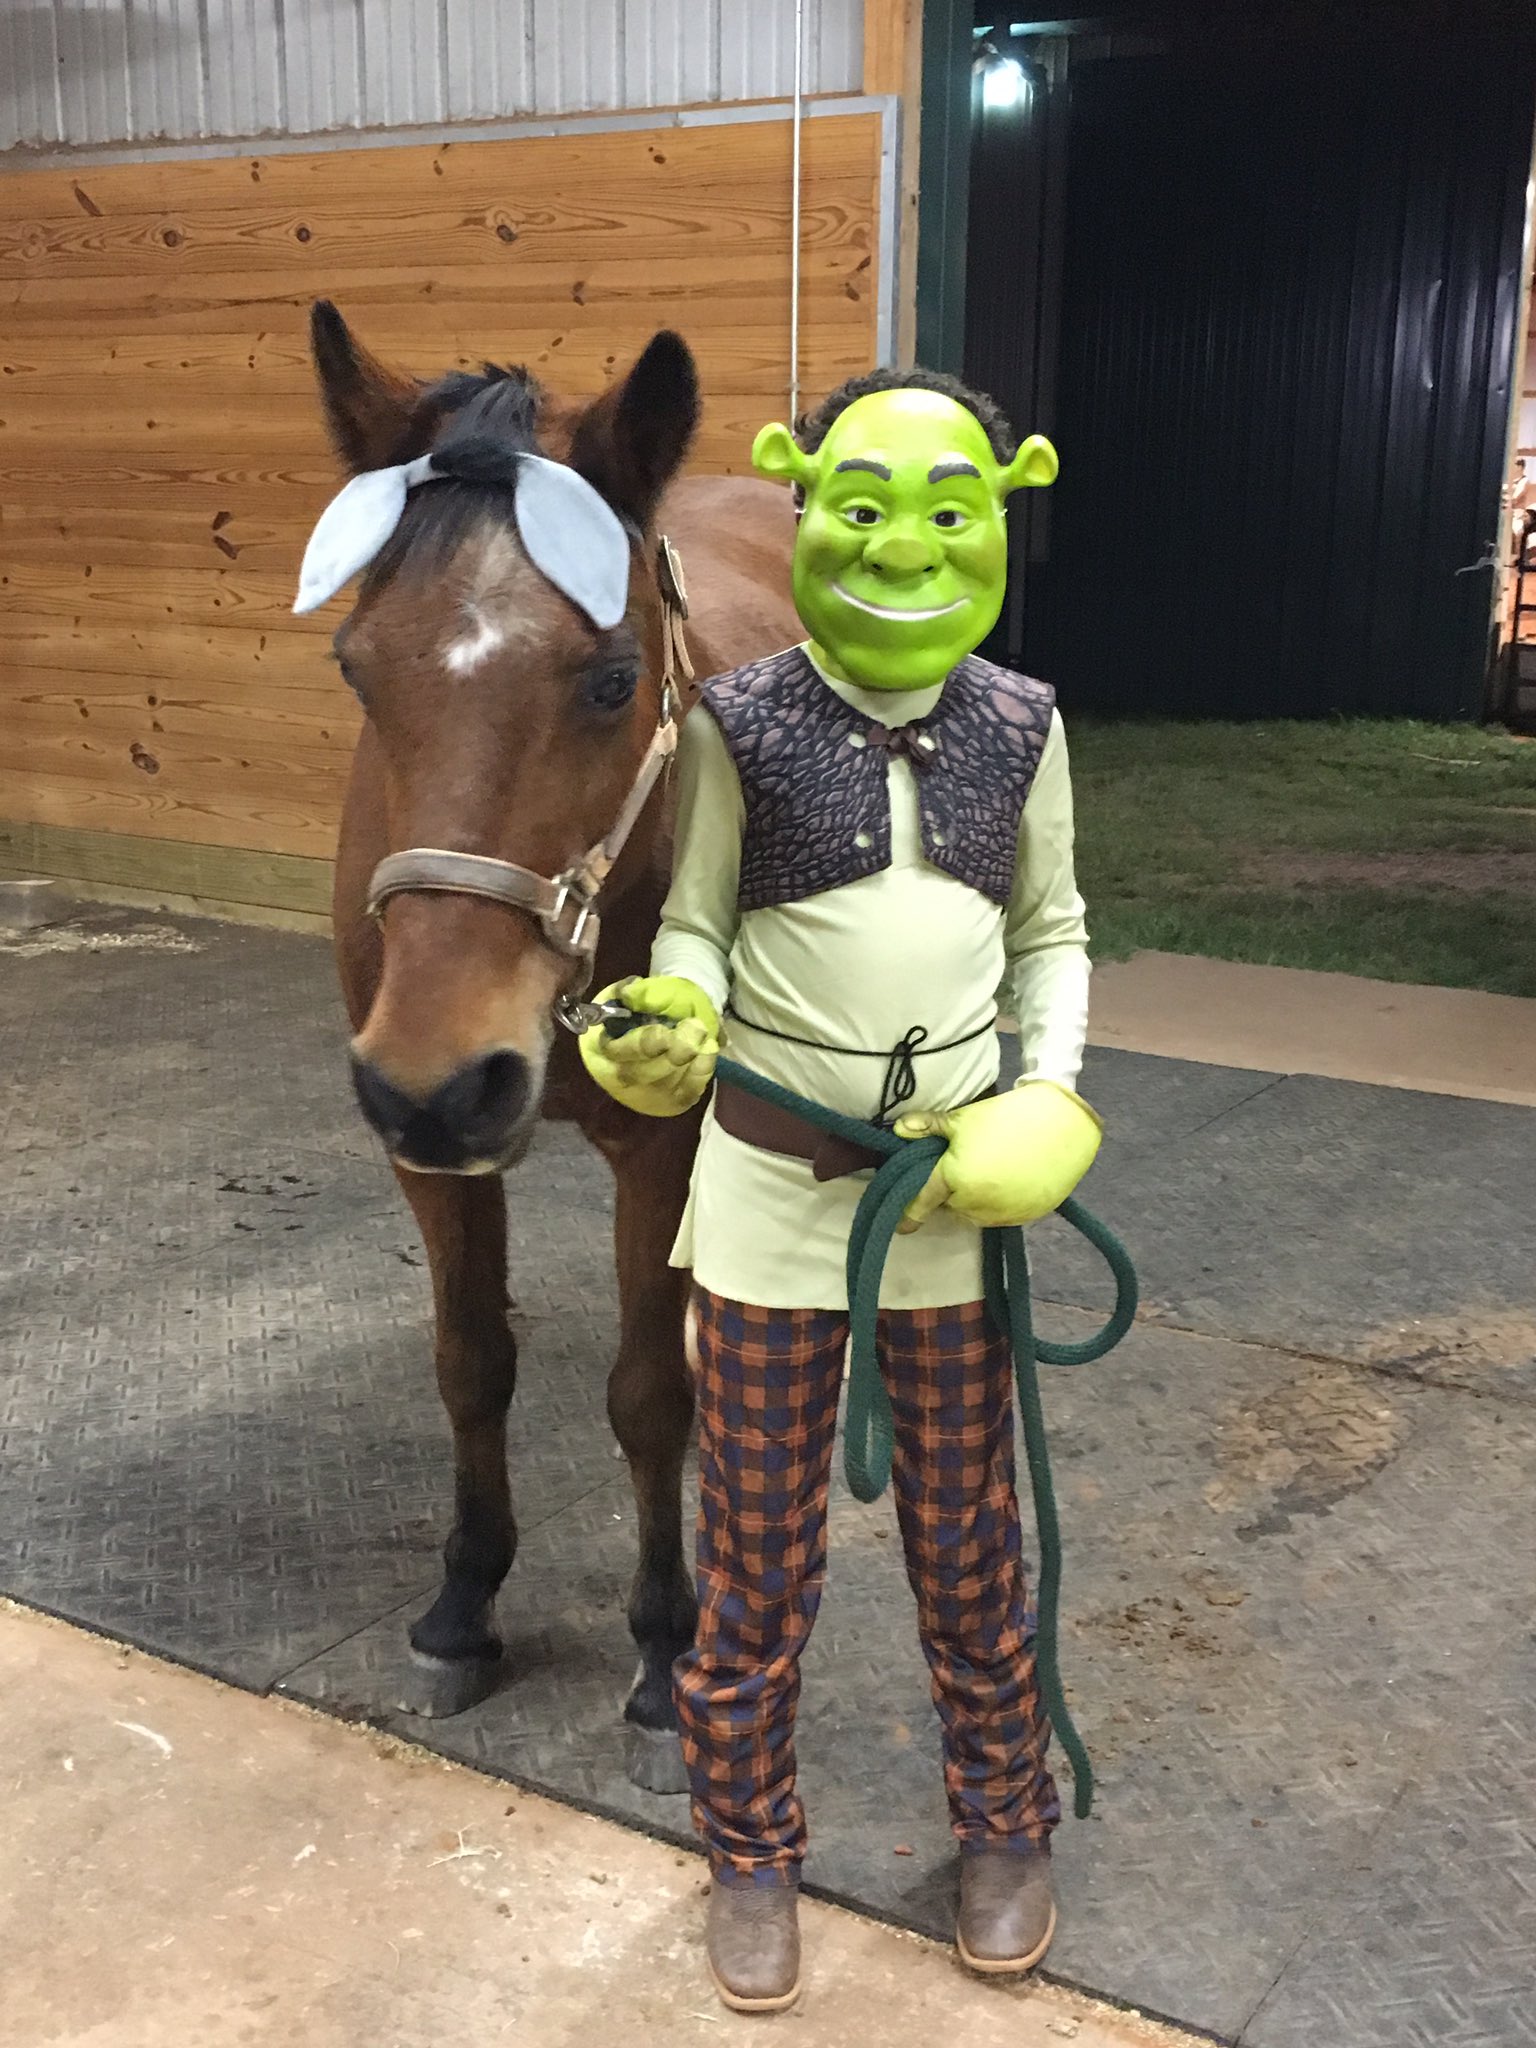 Awesome Homemade Shrek and Donkey Costumes - 9 Years in the Making!